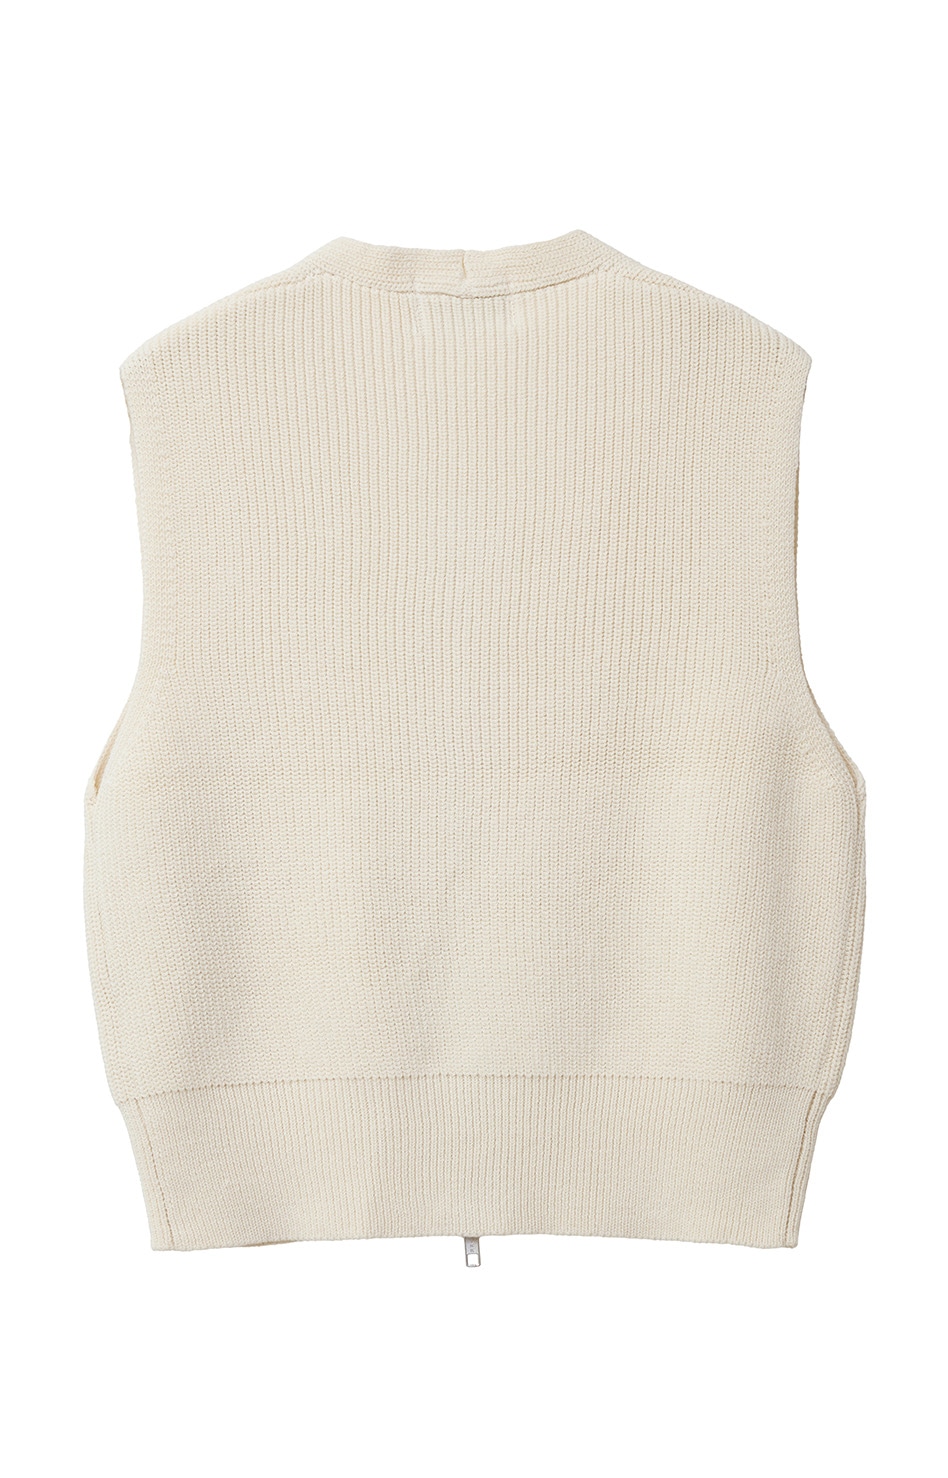 ZIP COMPACT KNIT VEST｜TOPS(トップス)｜CLANE OFFICIAL ONLINE STORE